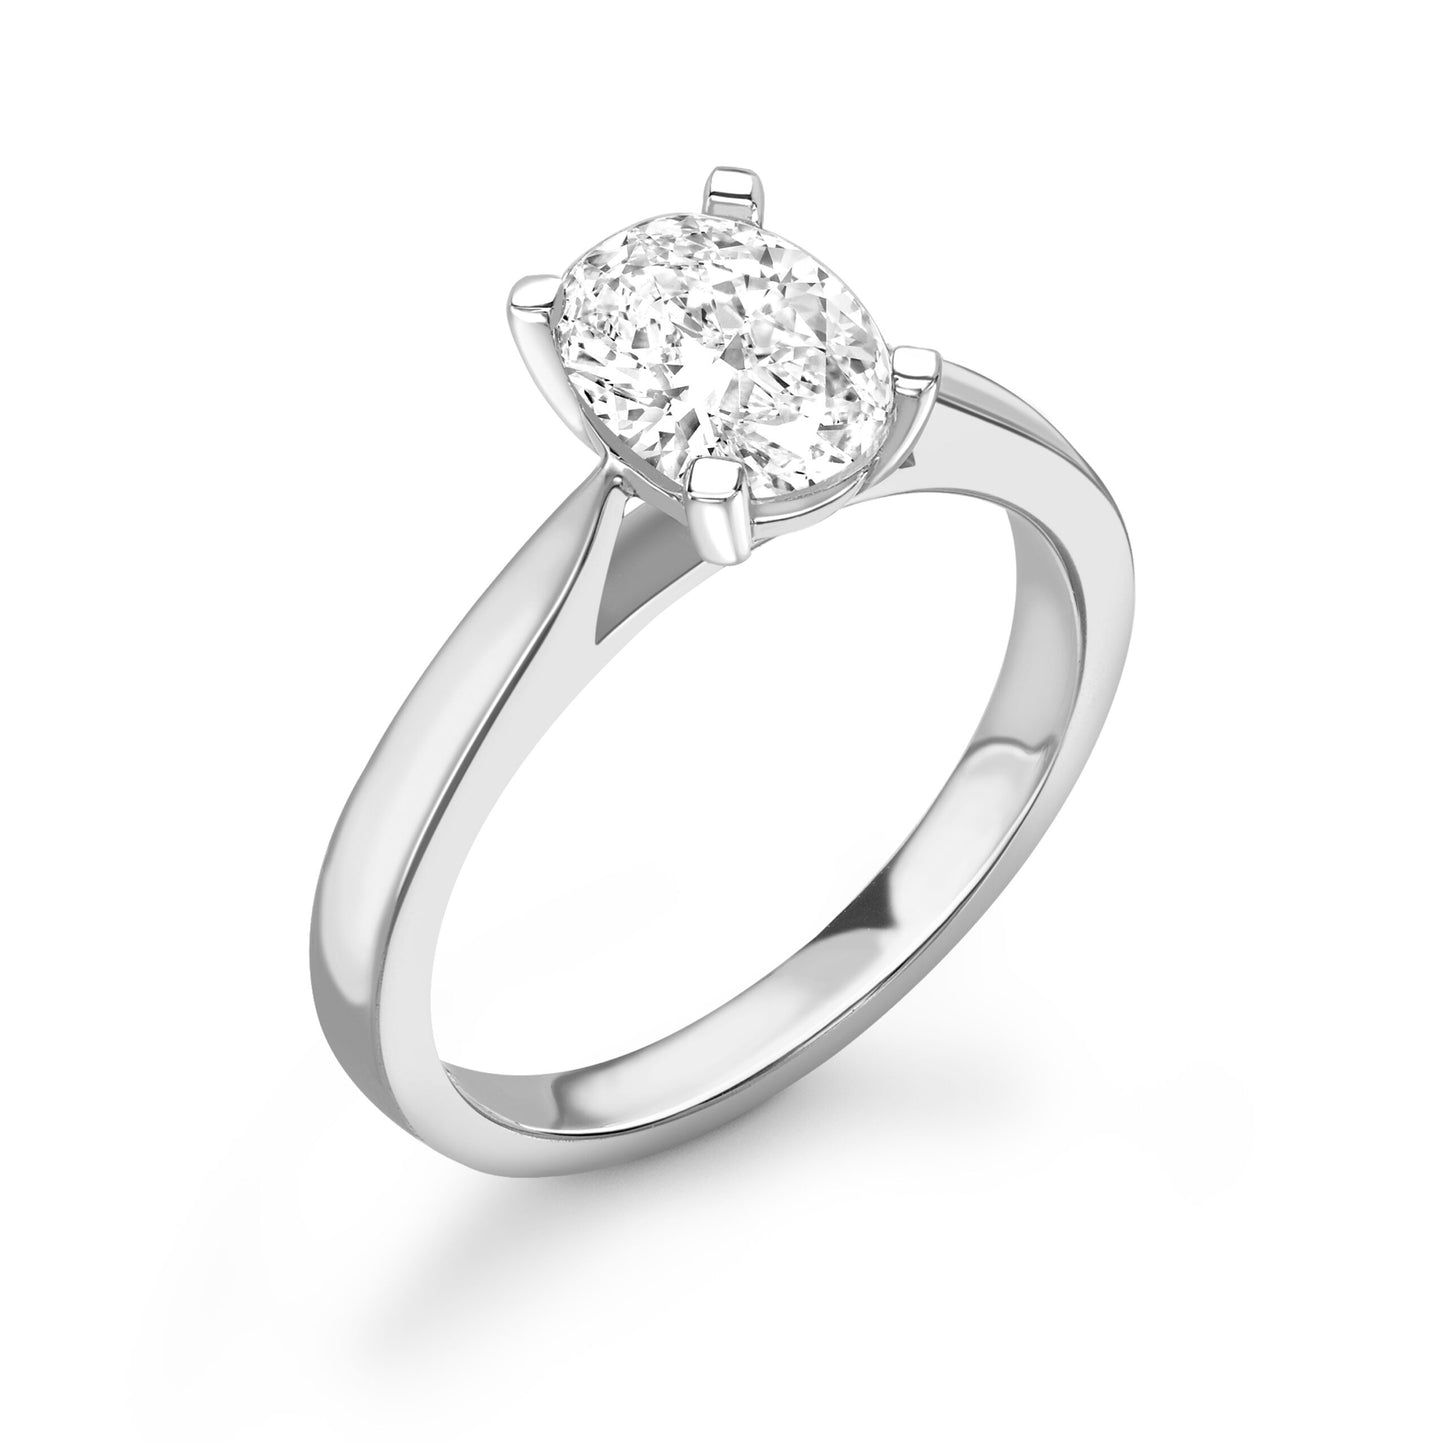 Oval Solitaire Diamond ring in Platinum